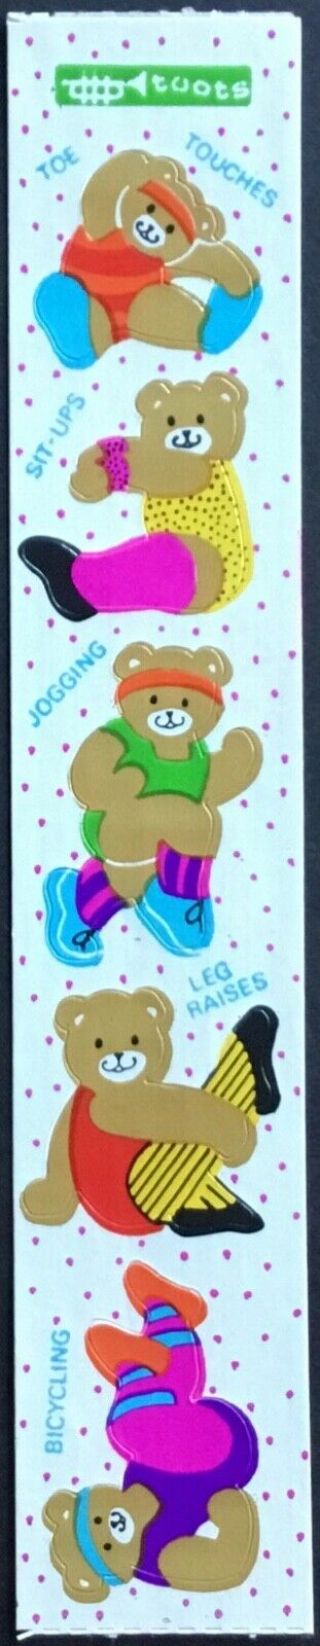 Vintage Stickers - Cardesign - Toots - Teddies Workout - Dated 1984